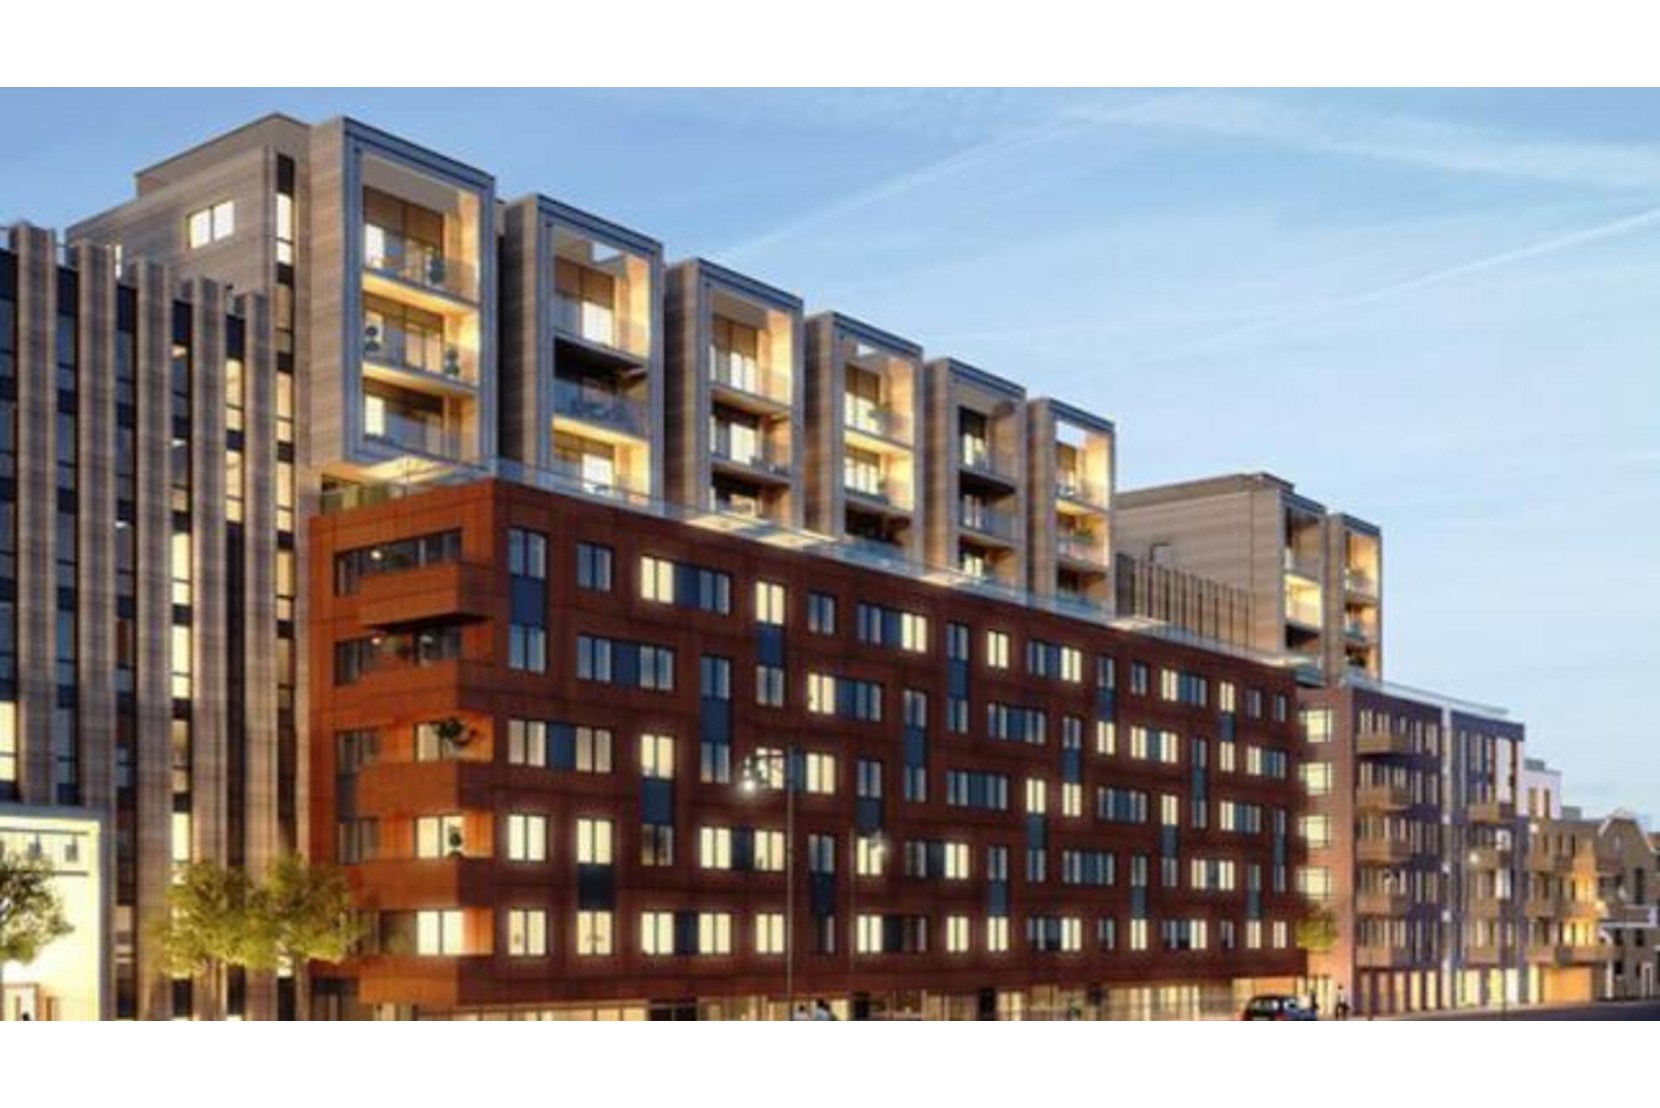 Apartments to Rent by a2dominion at City Wharf, Hackney, N1, development panoramic